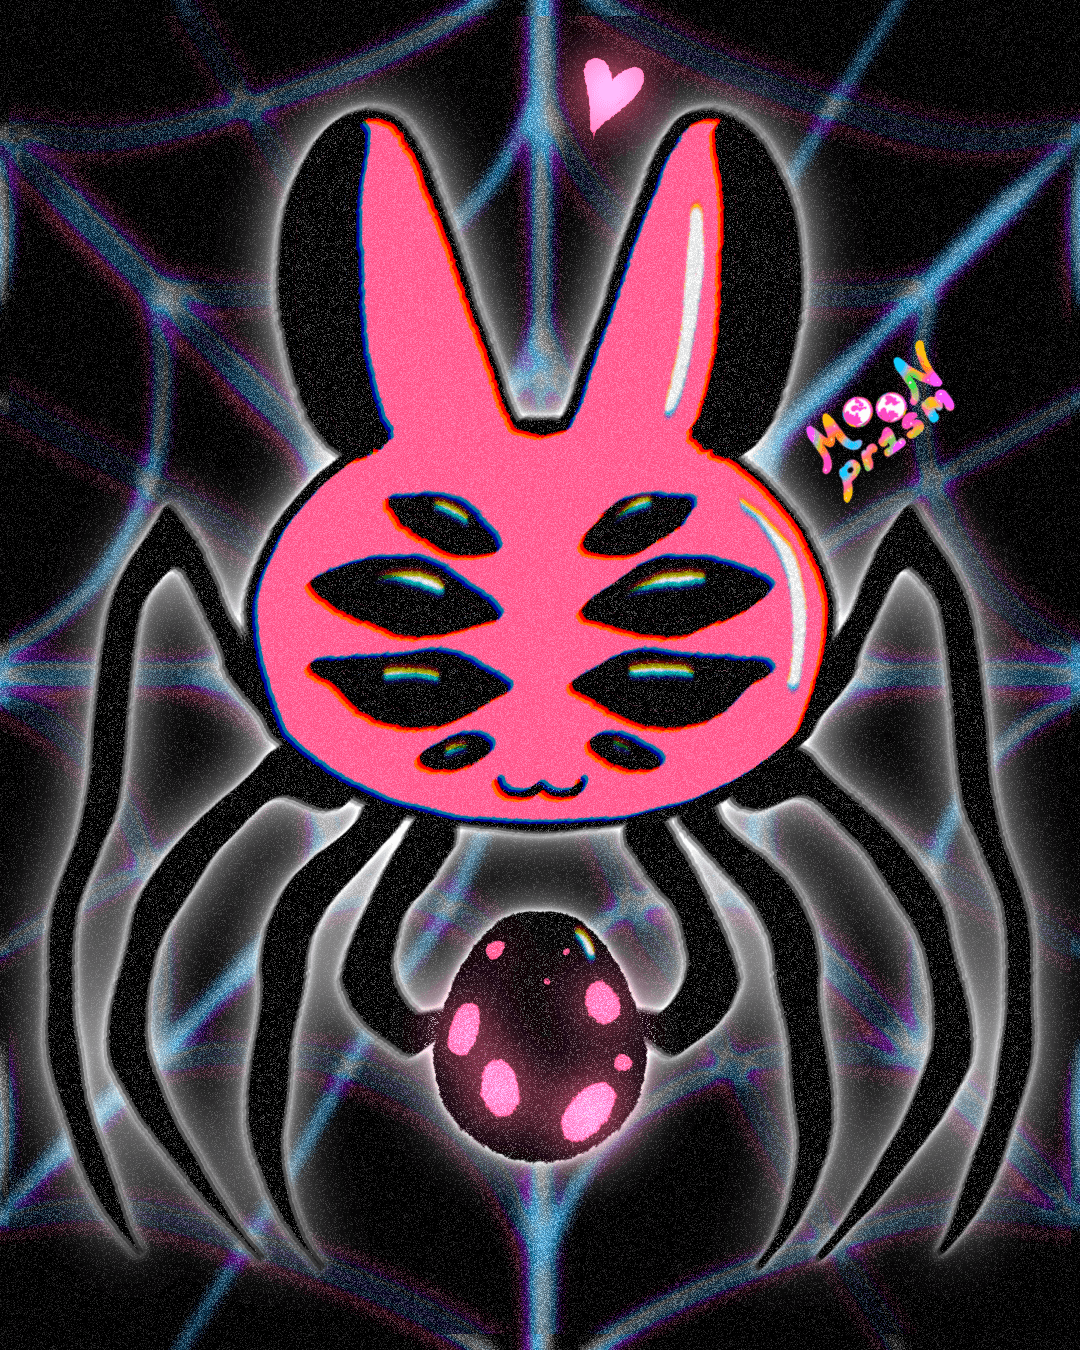 An illustration of a giant pink spiderbunny (a spider-rabbit hybrid creature). The spiderbunny is sitting on a glowing blue web, smiling and holding an egg.